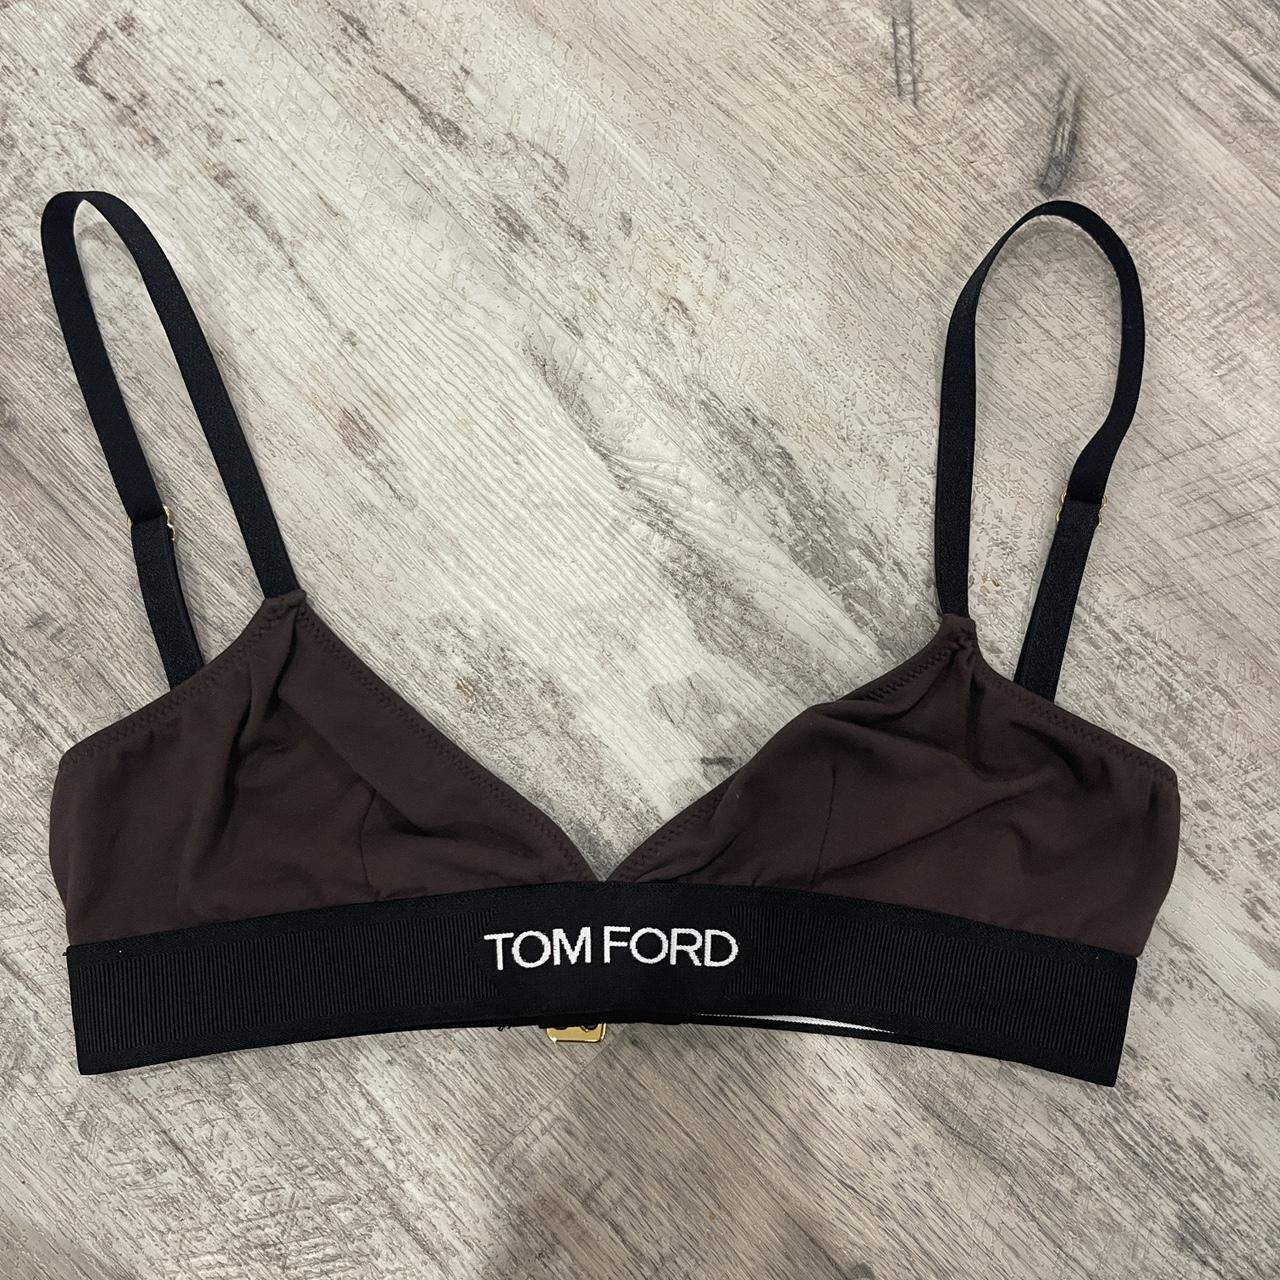 TOM FORD Women's Black and Brown Bra